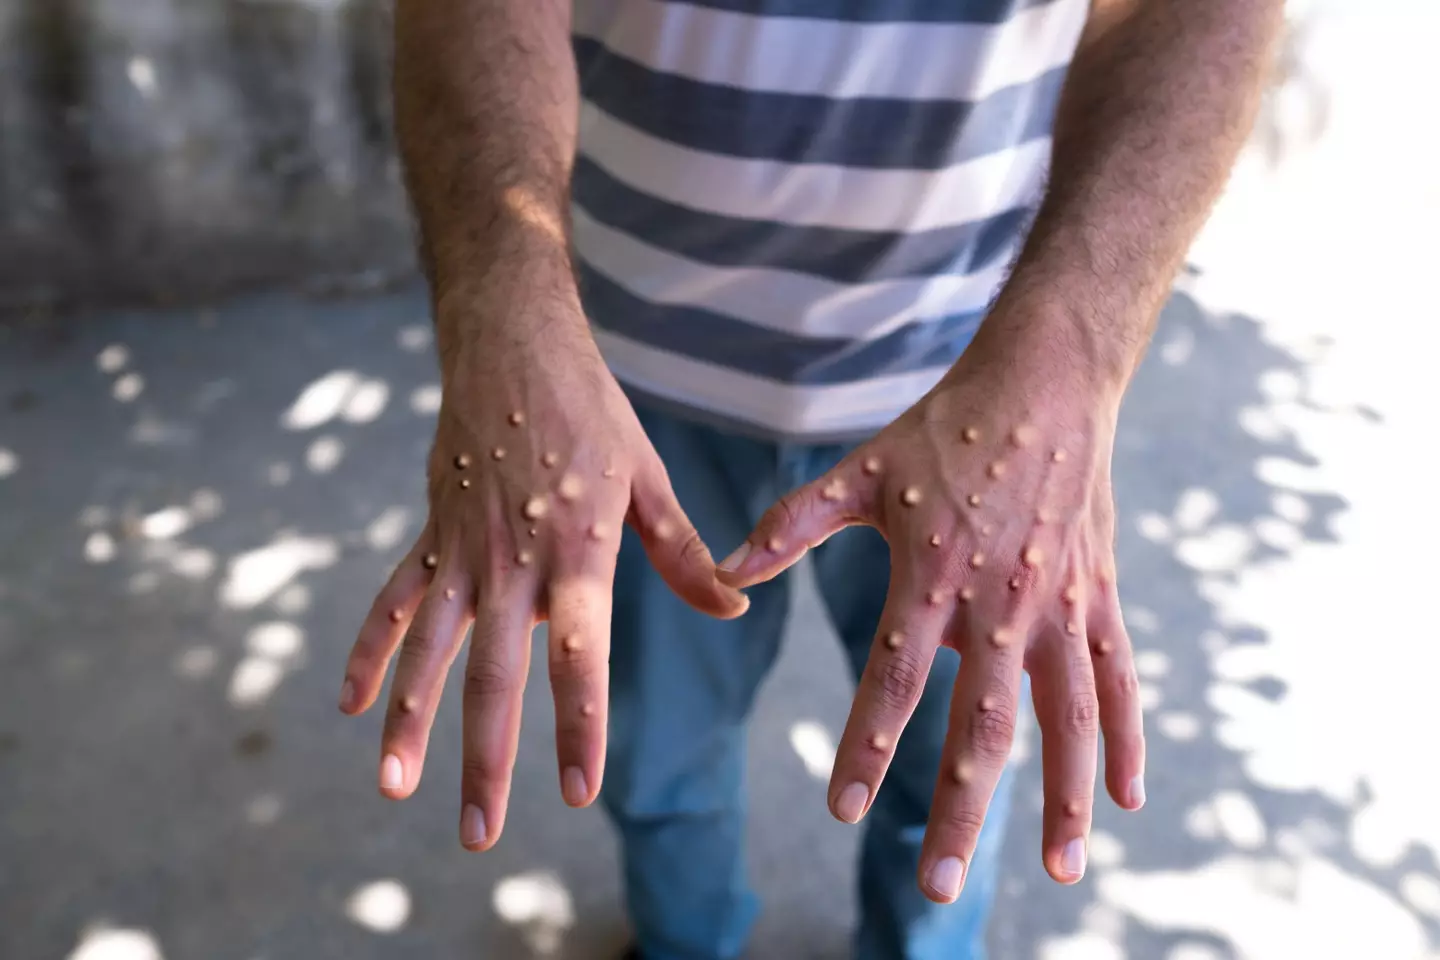 Man with blisters on his hands from monkeypox.